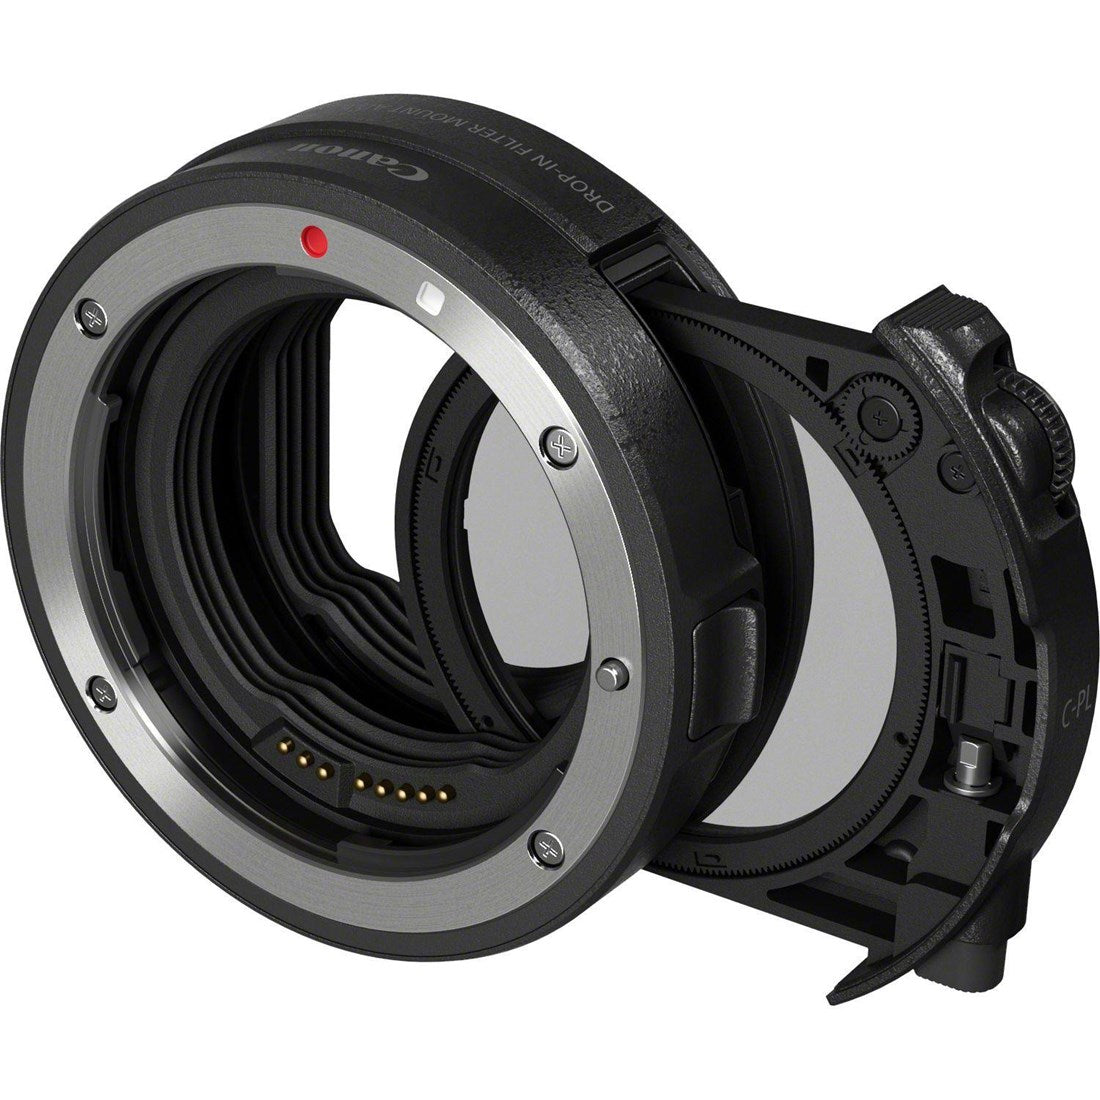 Canon Drop-in Filter Mount Adapter EF-EOS R with Canon Drop-in Circular Polarising Filter A - Product Photo 1